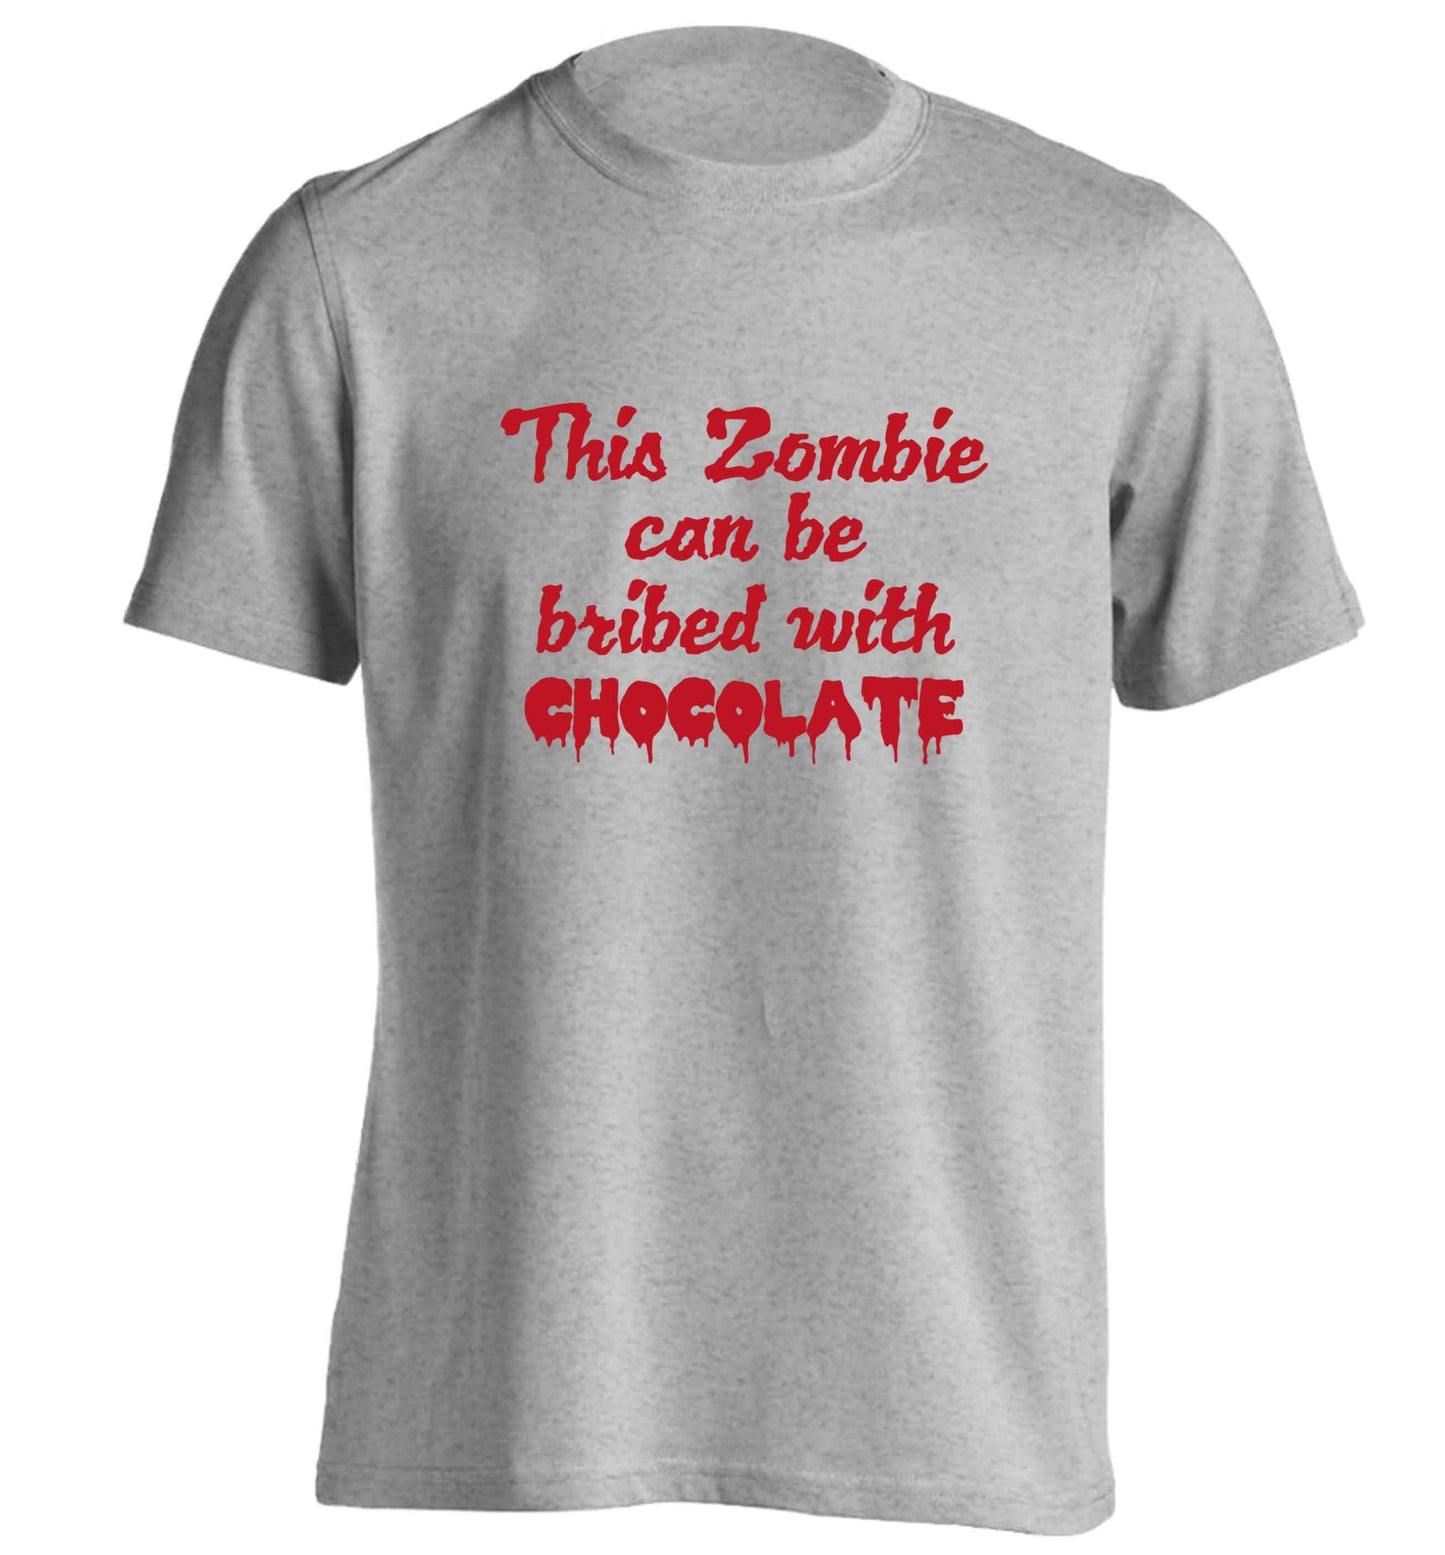 This zombie can be bribed with chocolate adults unisex grey Tshirt 2XL